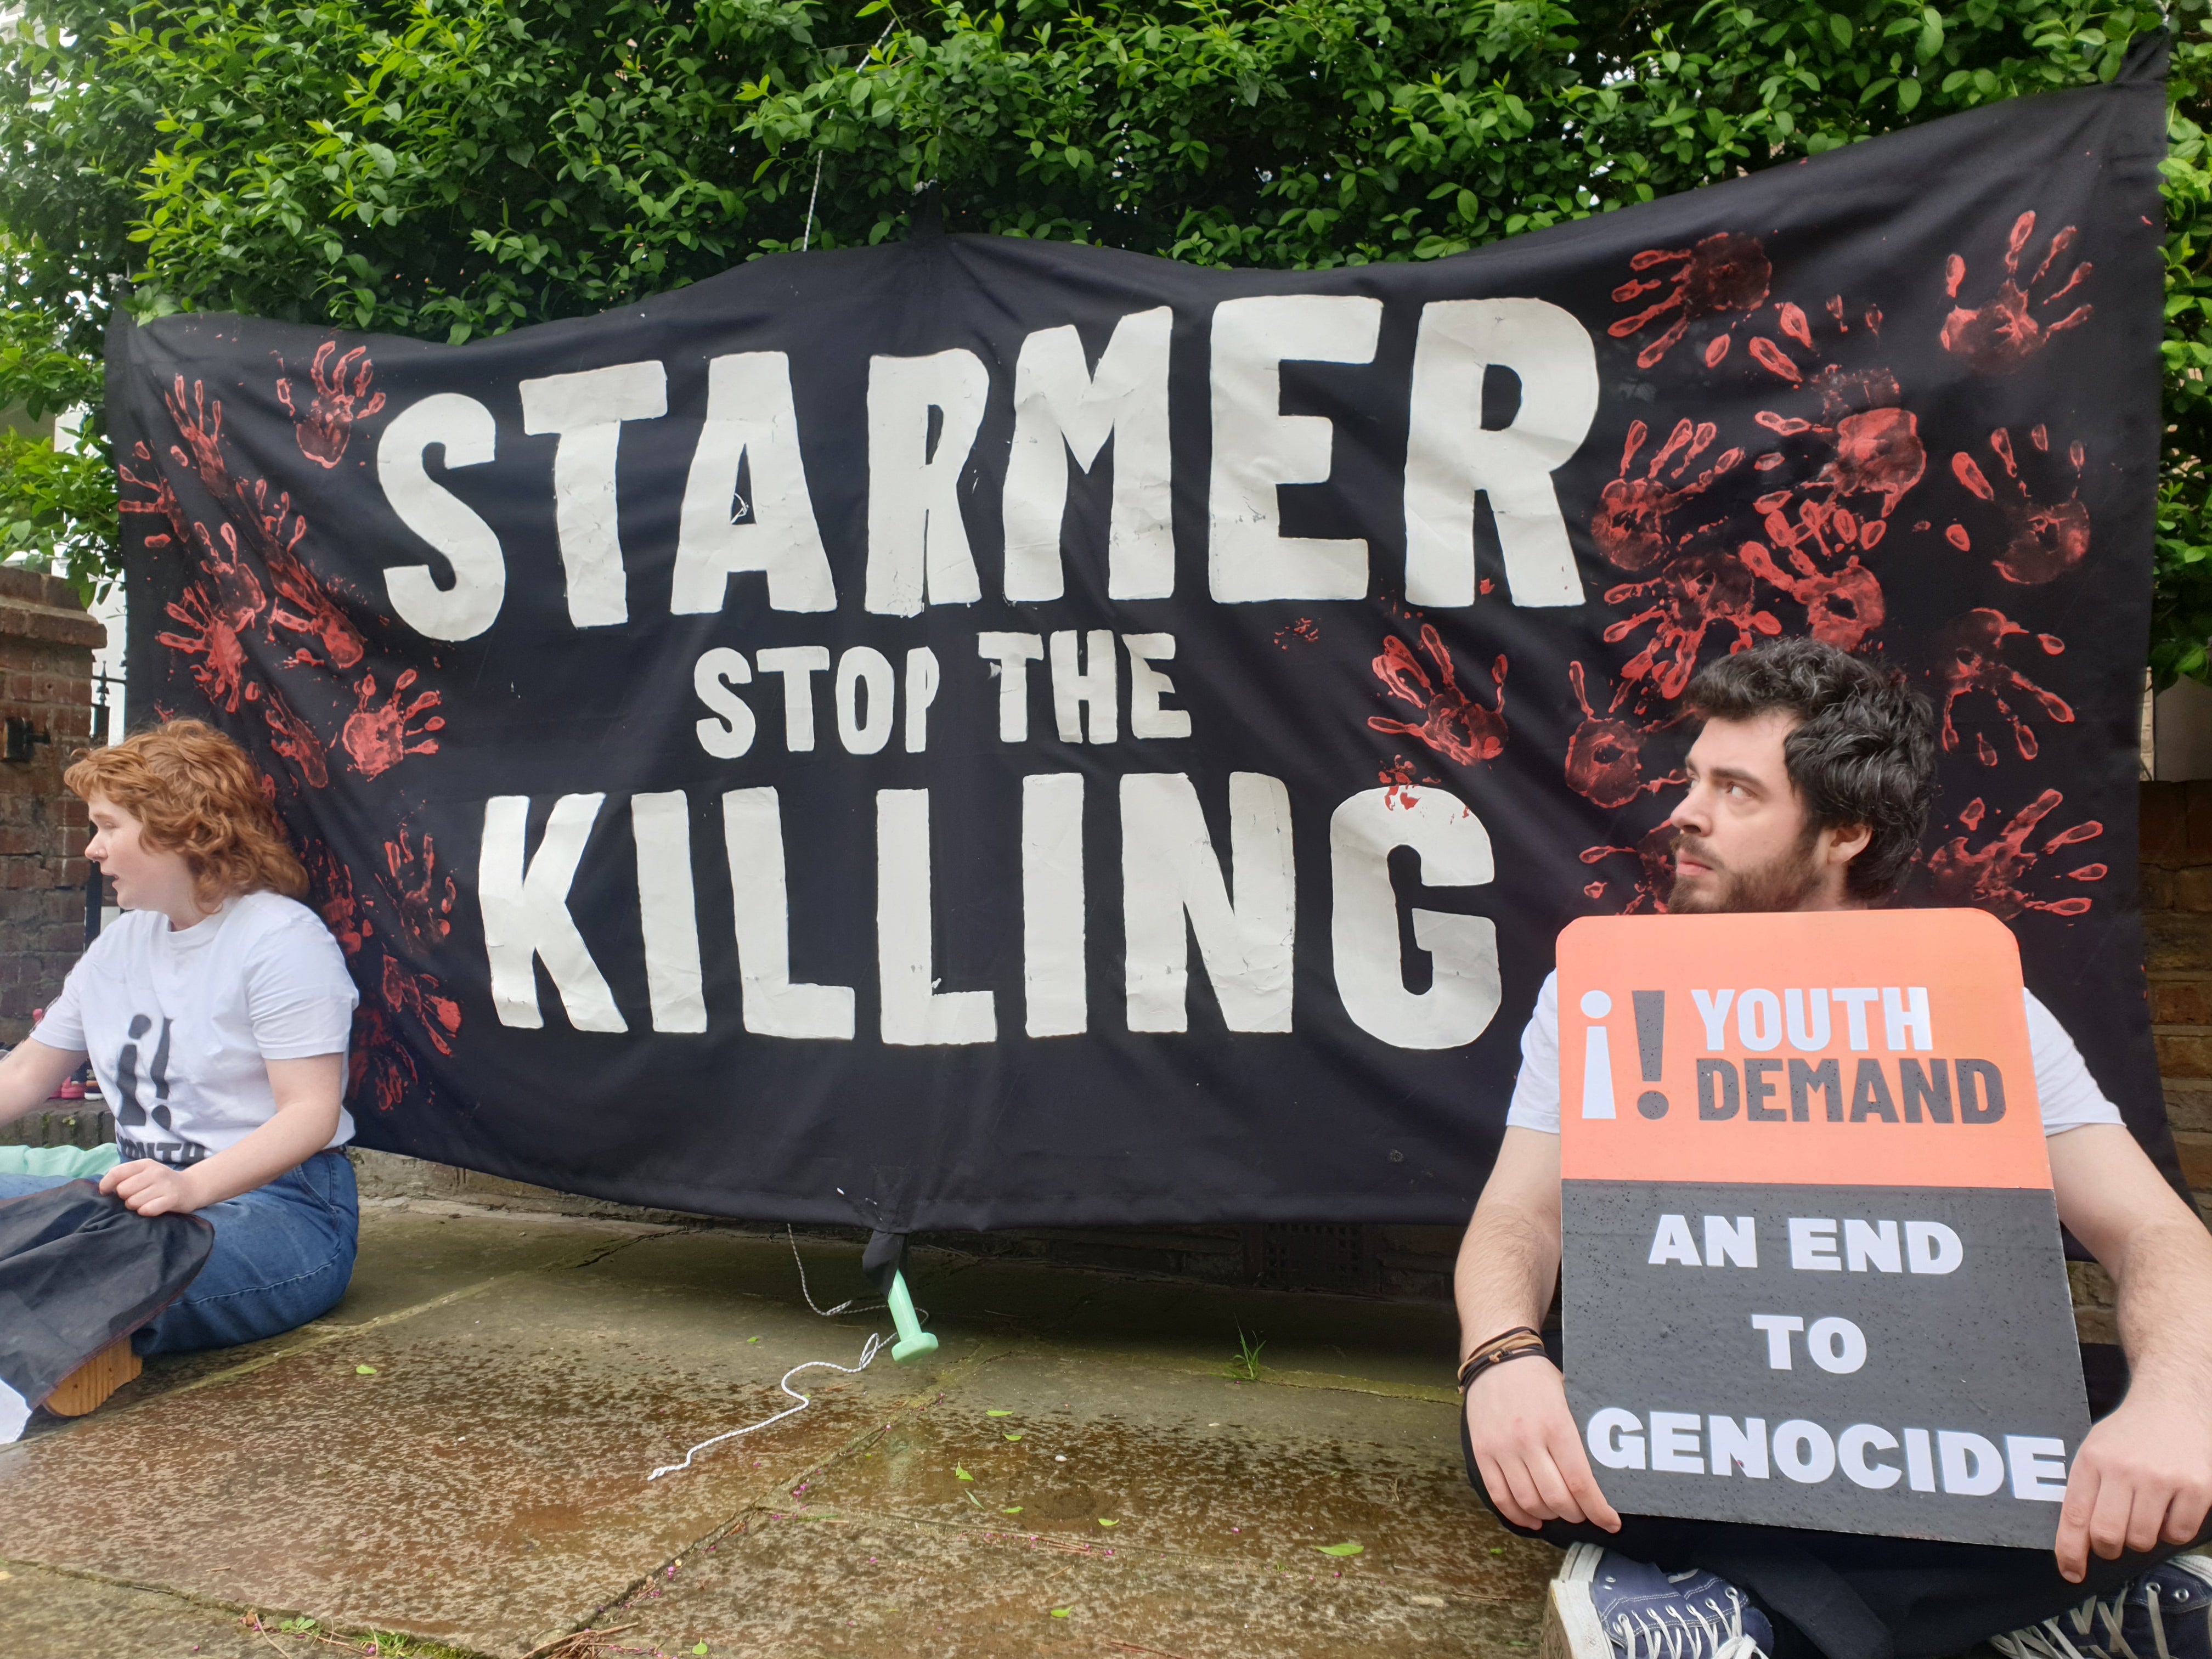 Three people have been charged after a protest outside Sir Keir Starmer’s home